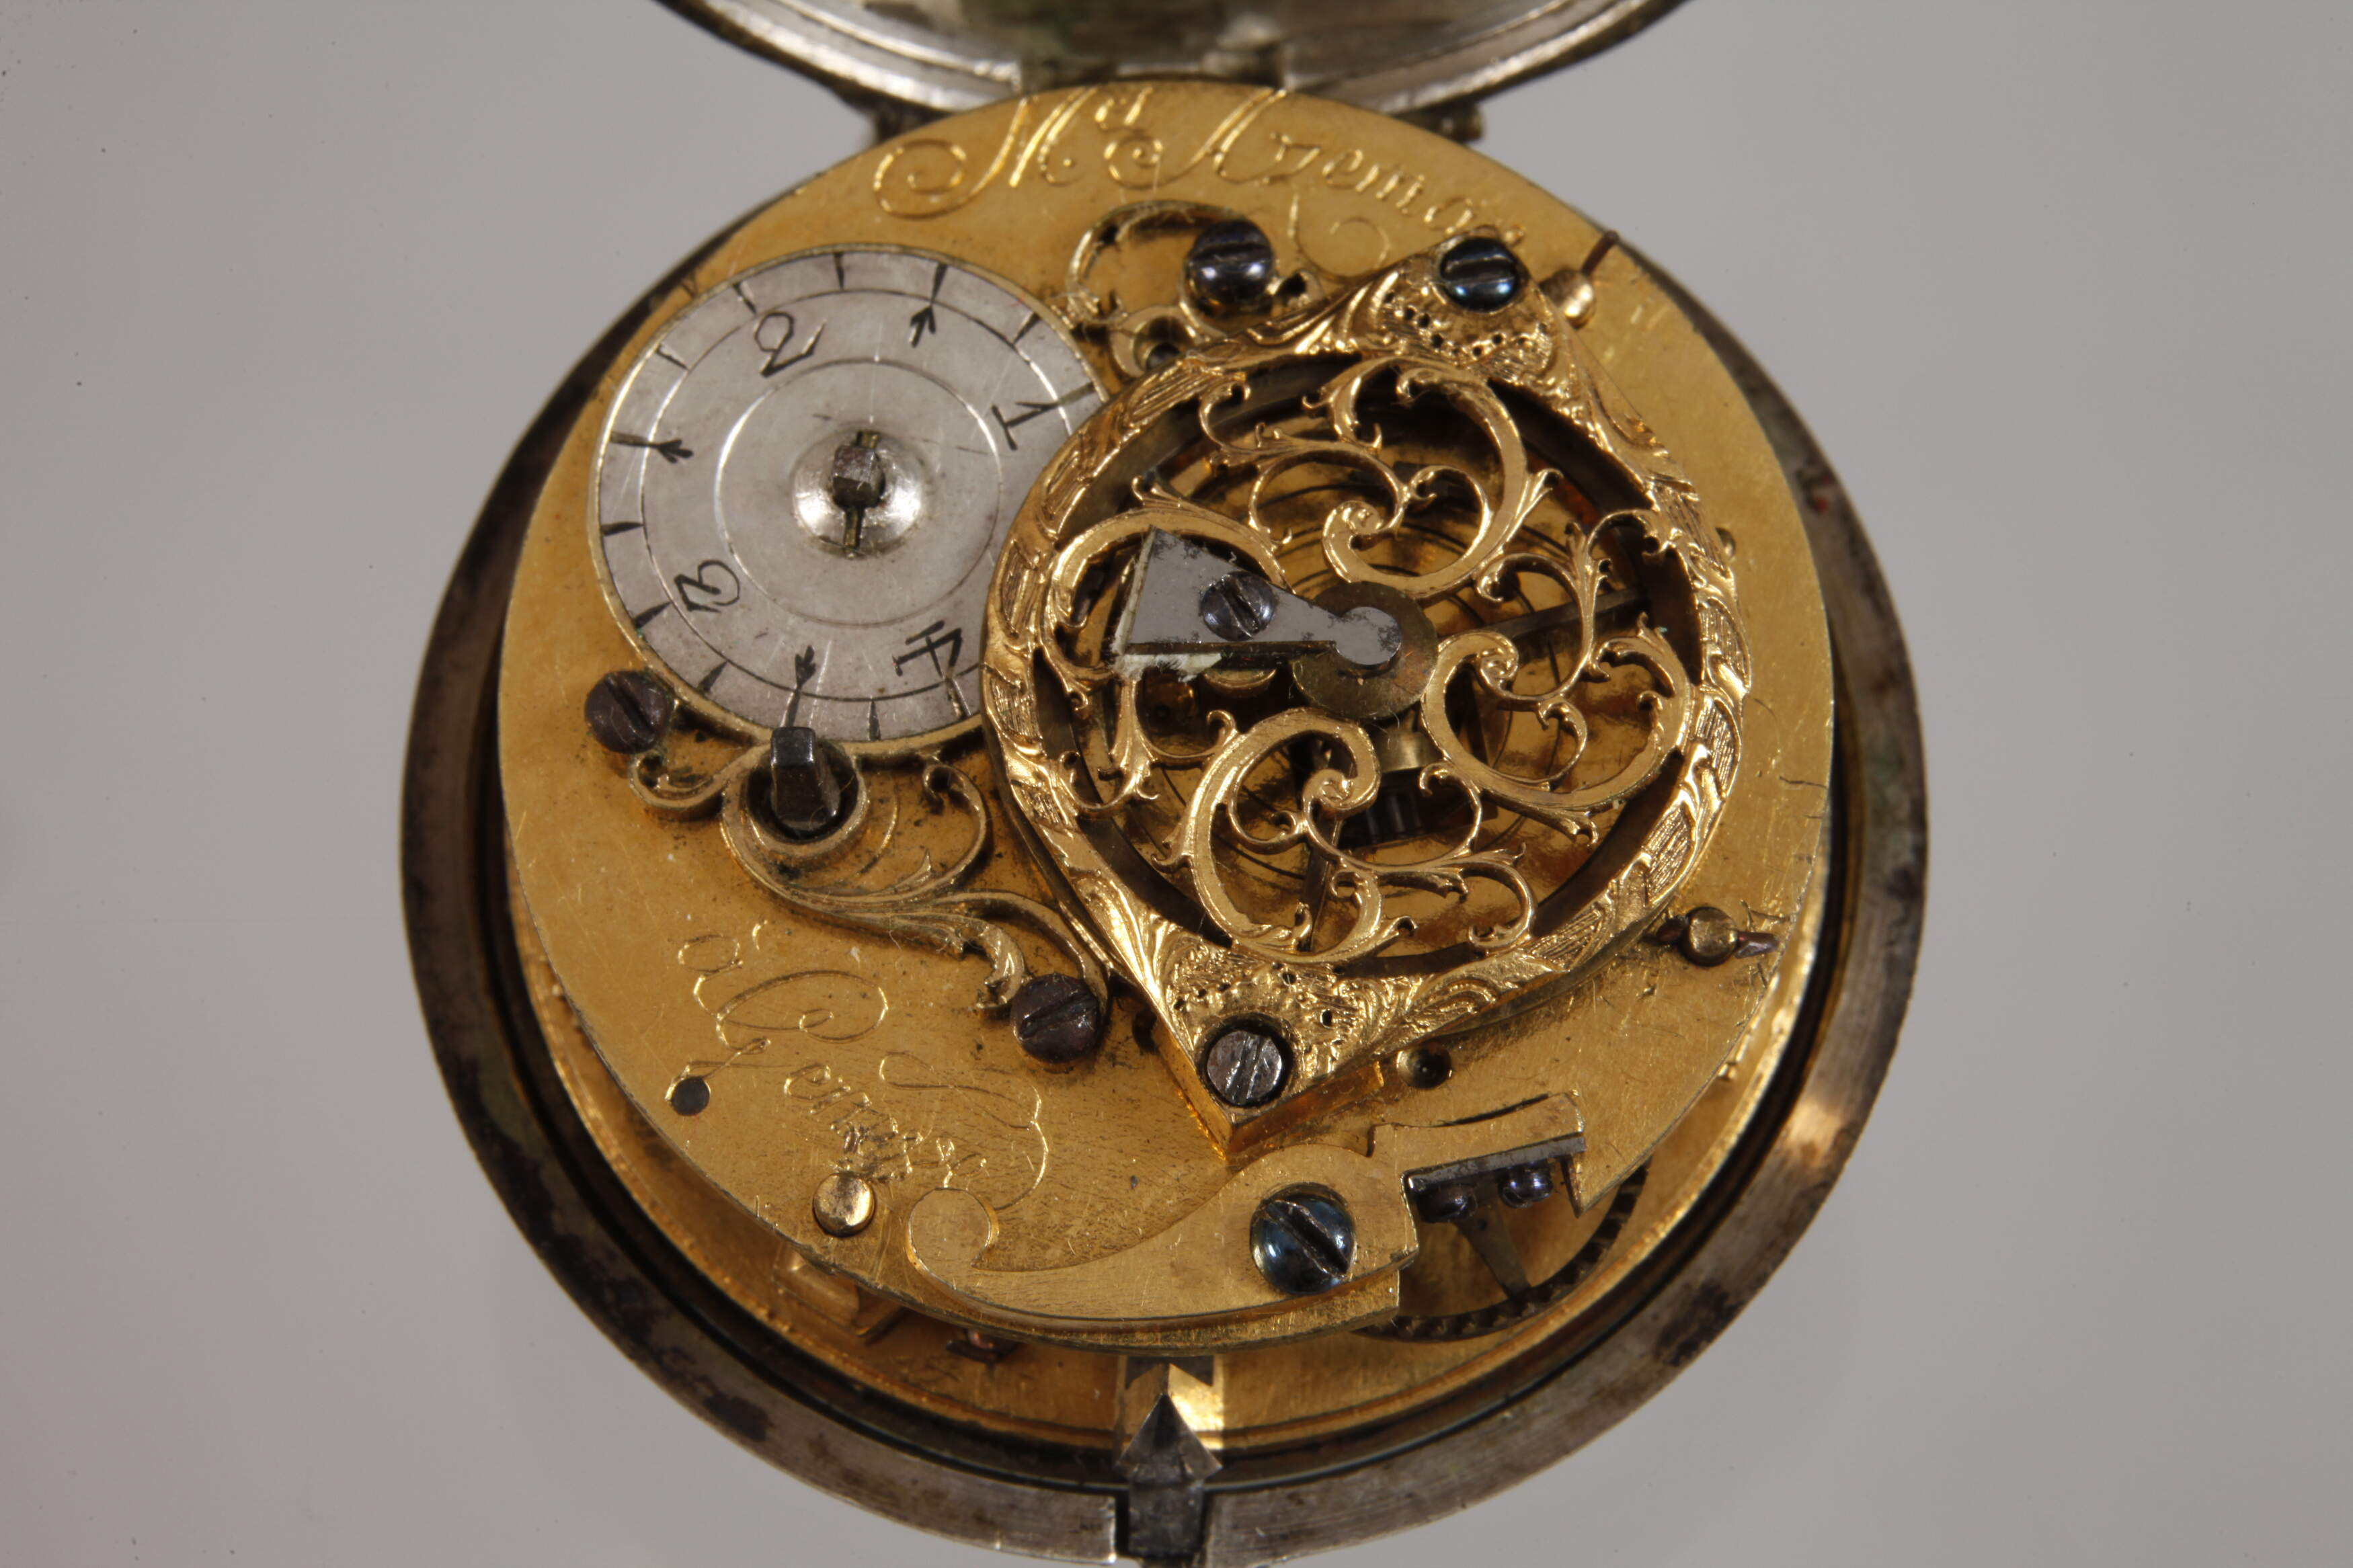 Spindle clock M. Azemar Geneve - Image 5 of 7